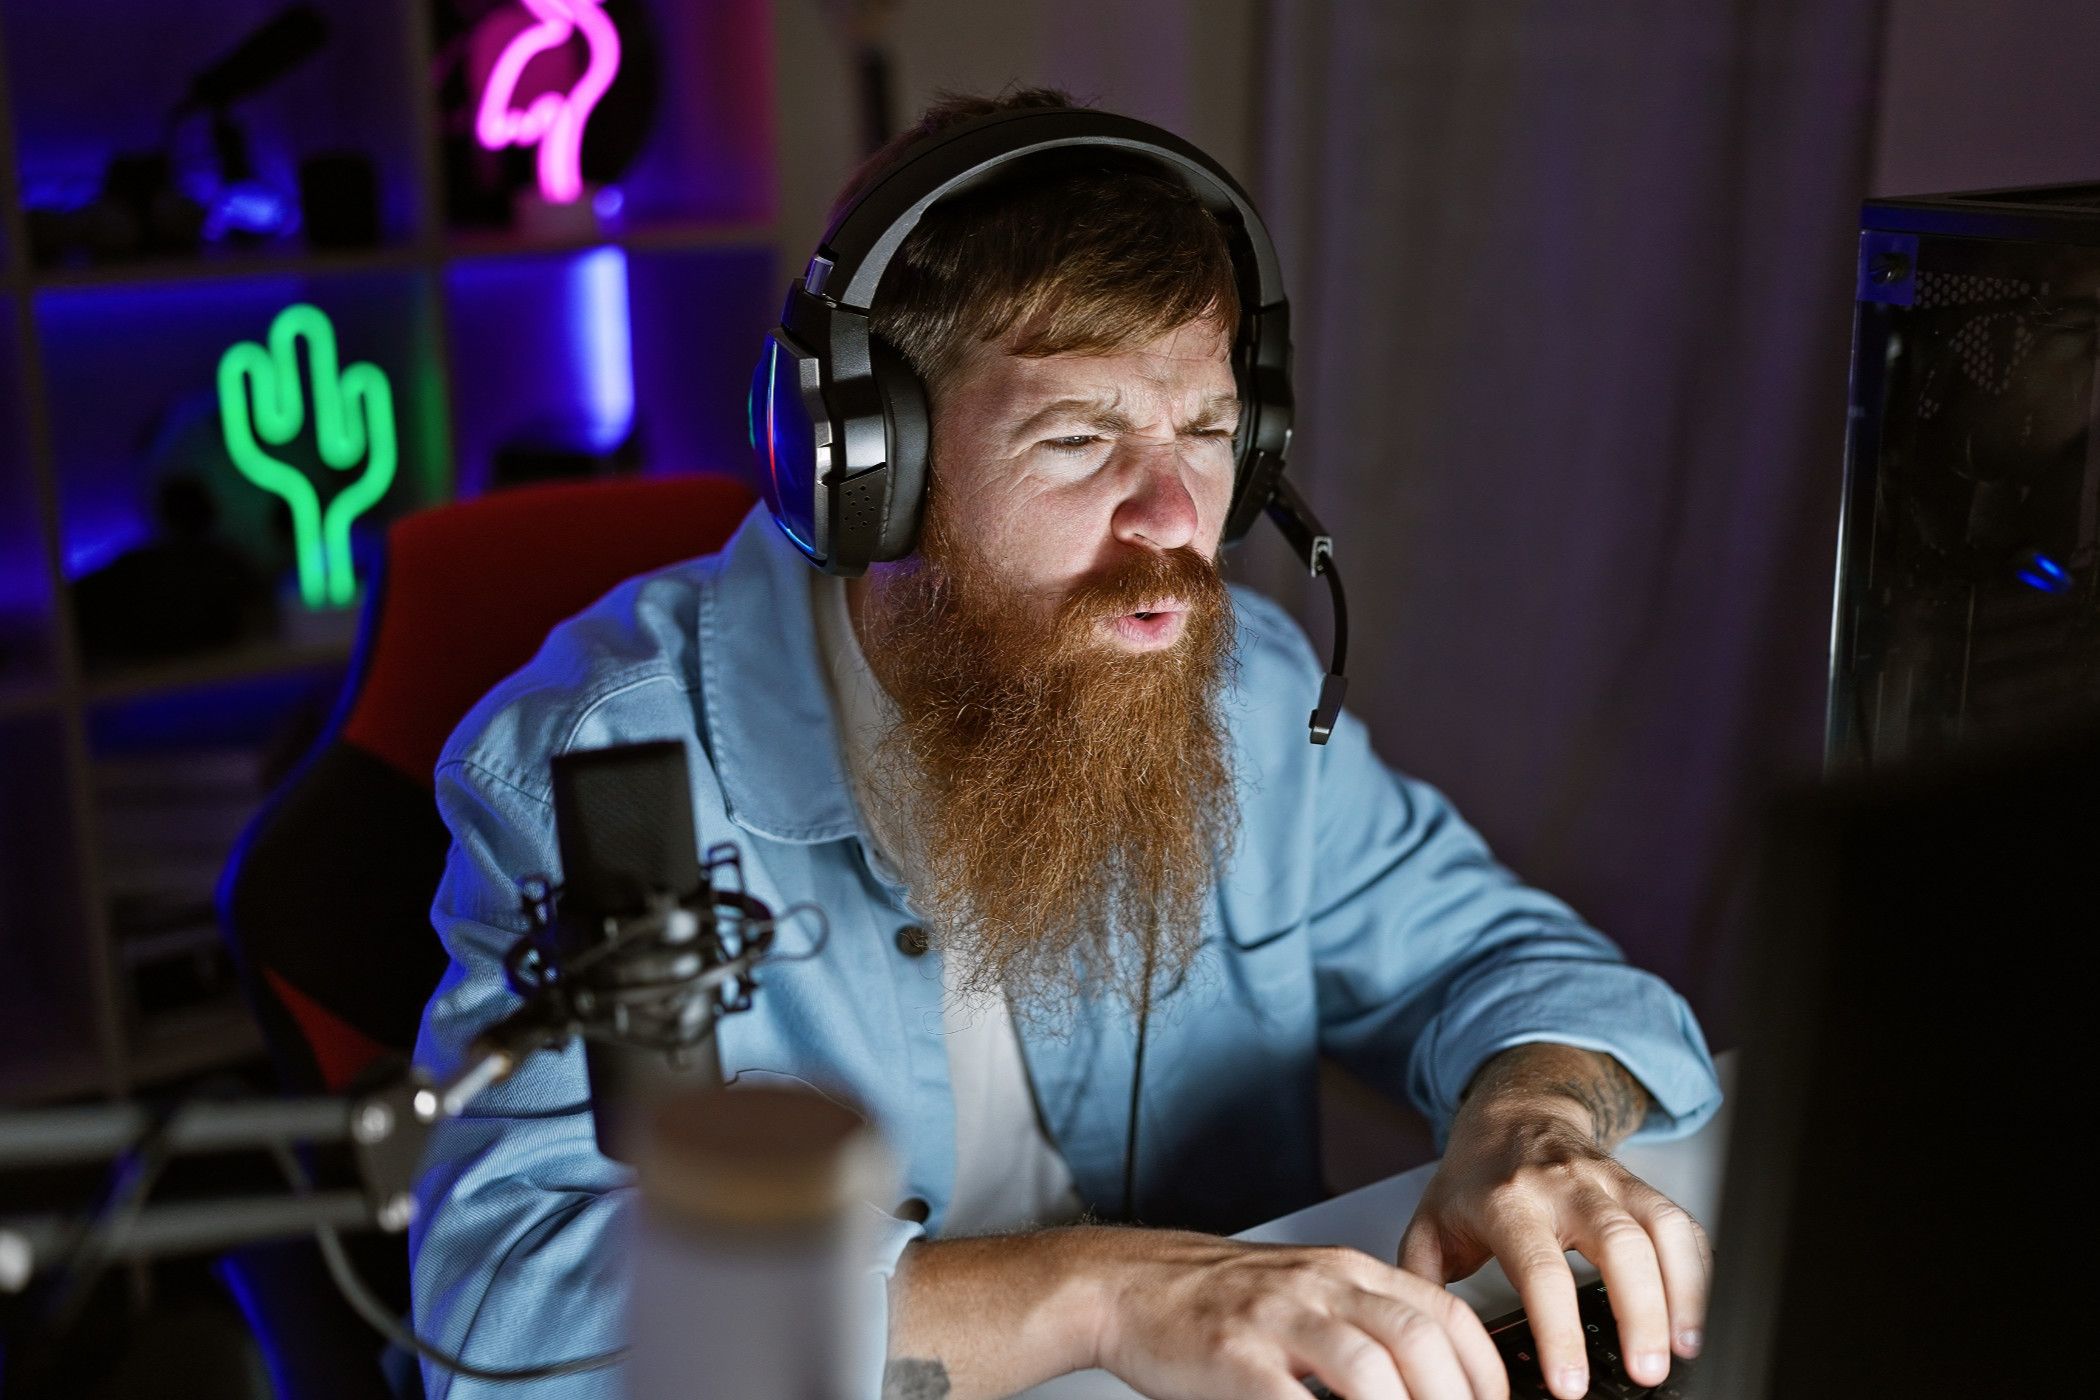 A concerned looking bearded gamer peering at the screen.